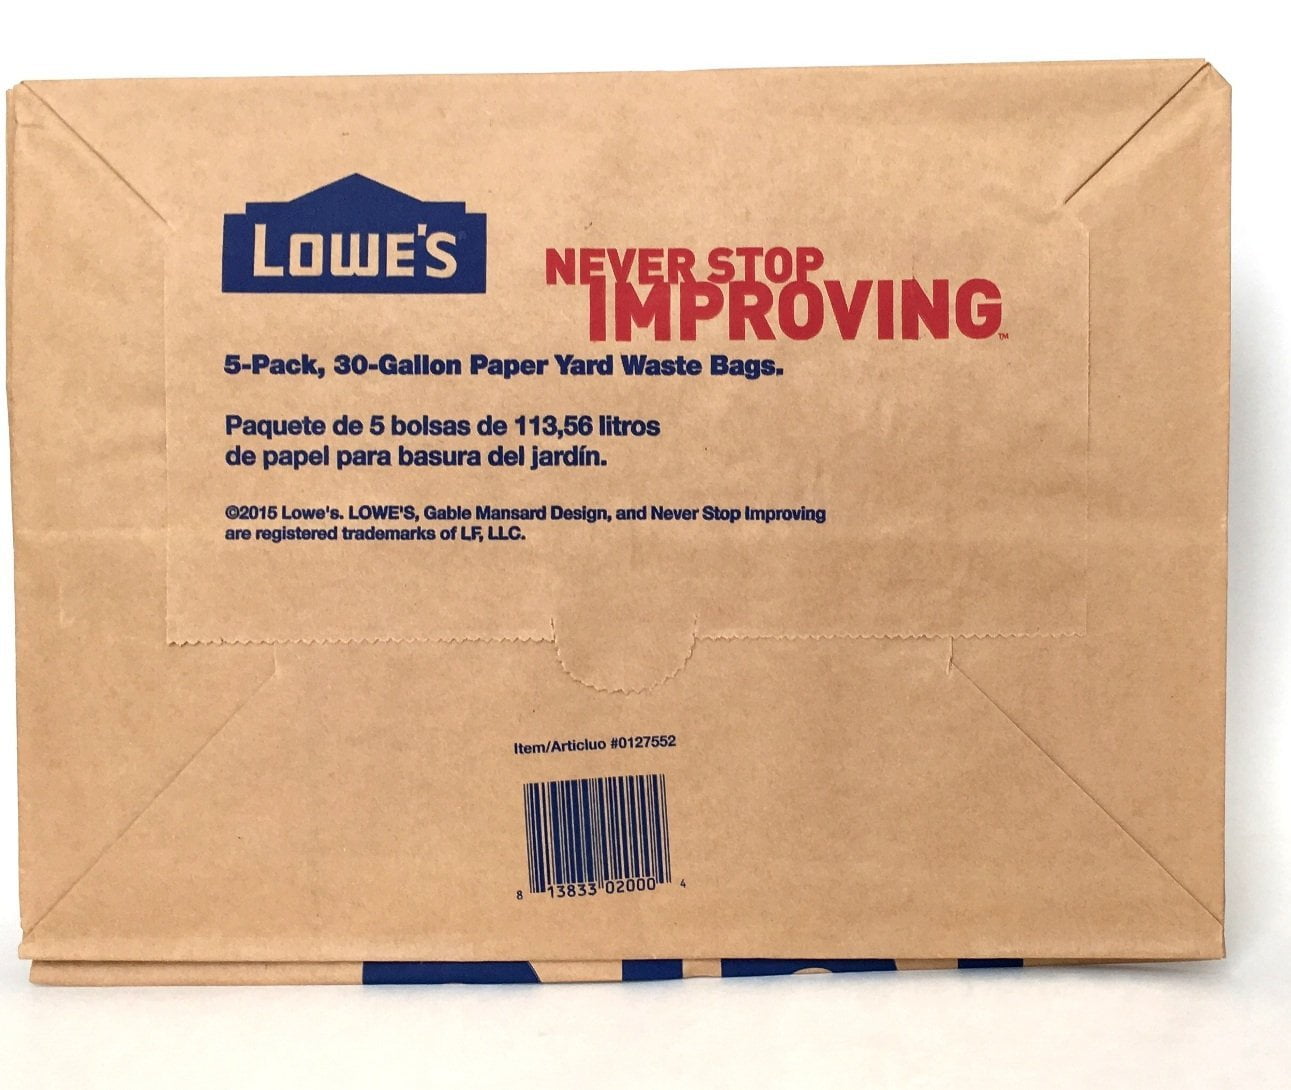 The Home Depot 30 Gal. Paper Lawn and Leaf Bags - 5 Pack HDLL1635